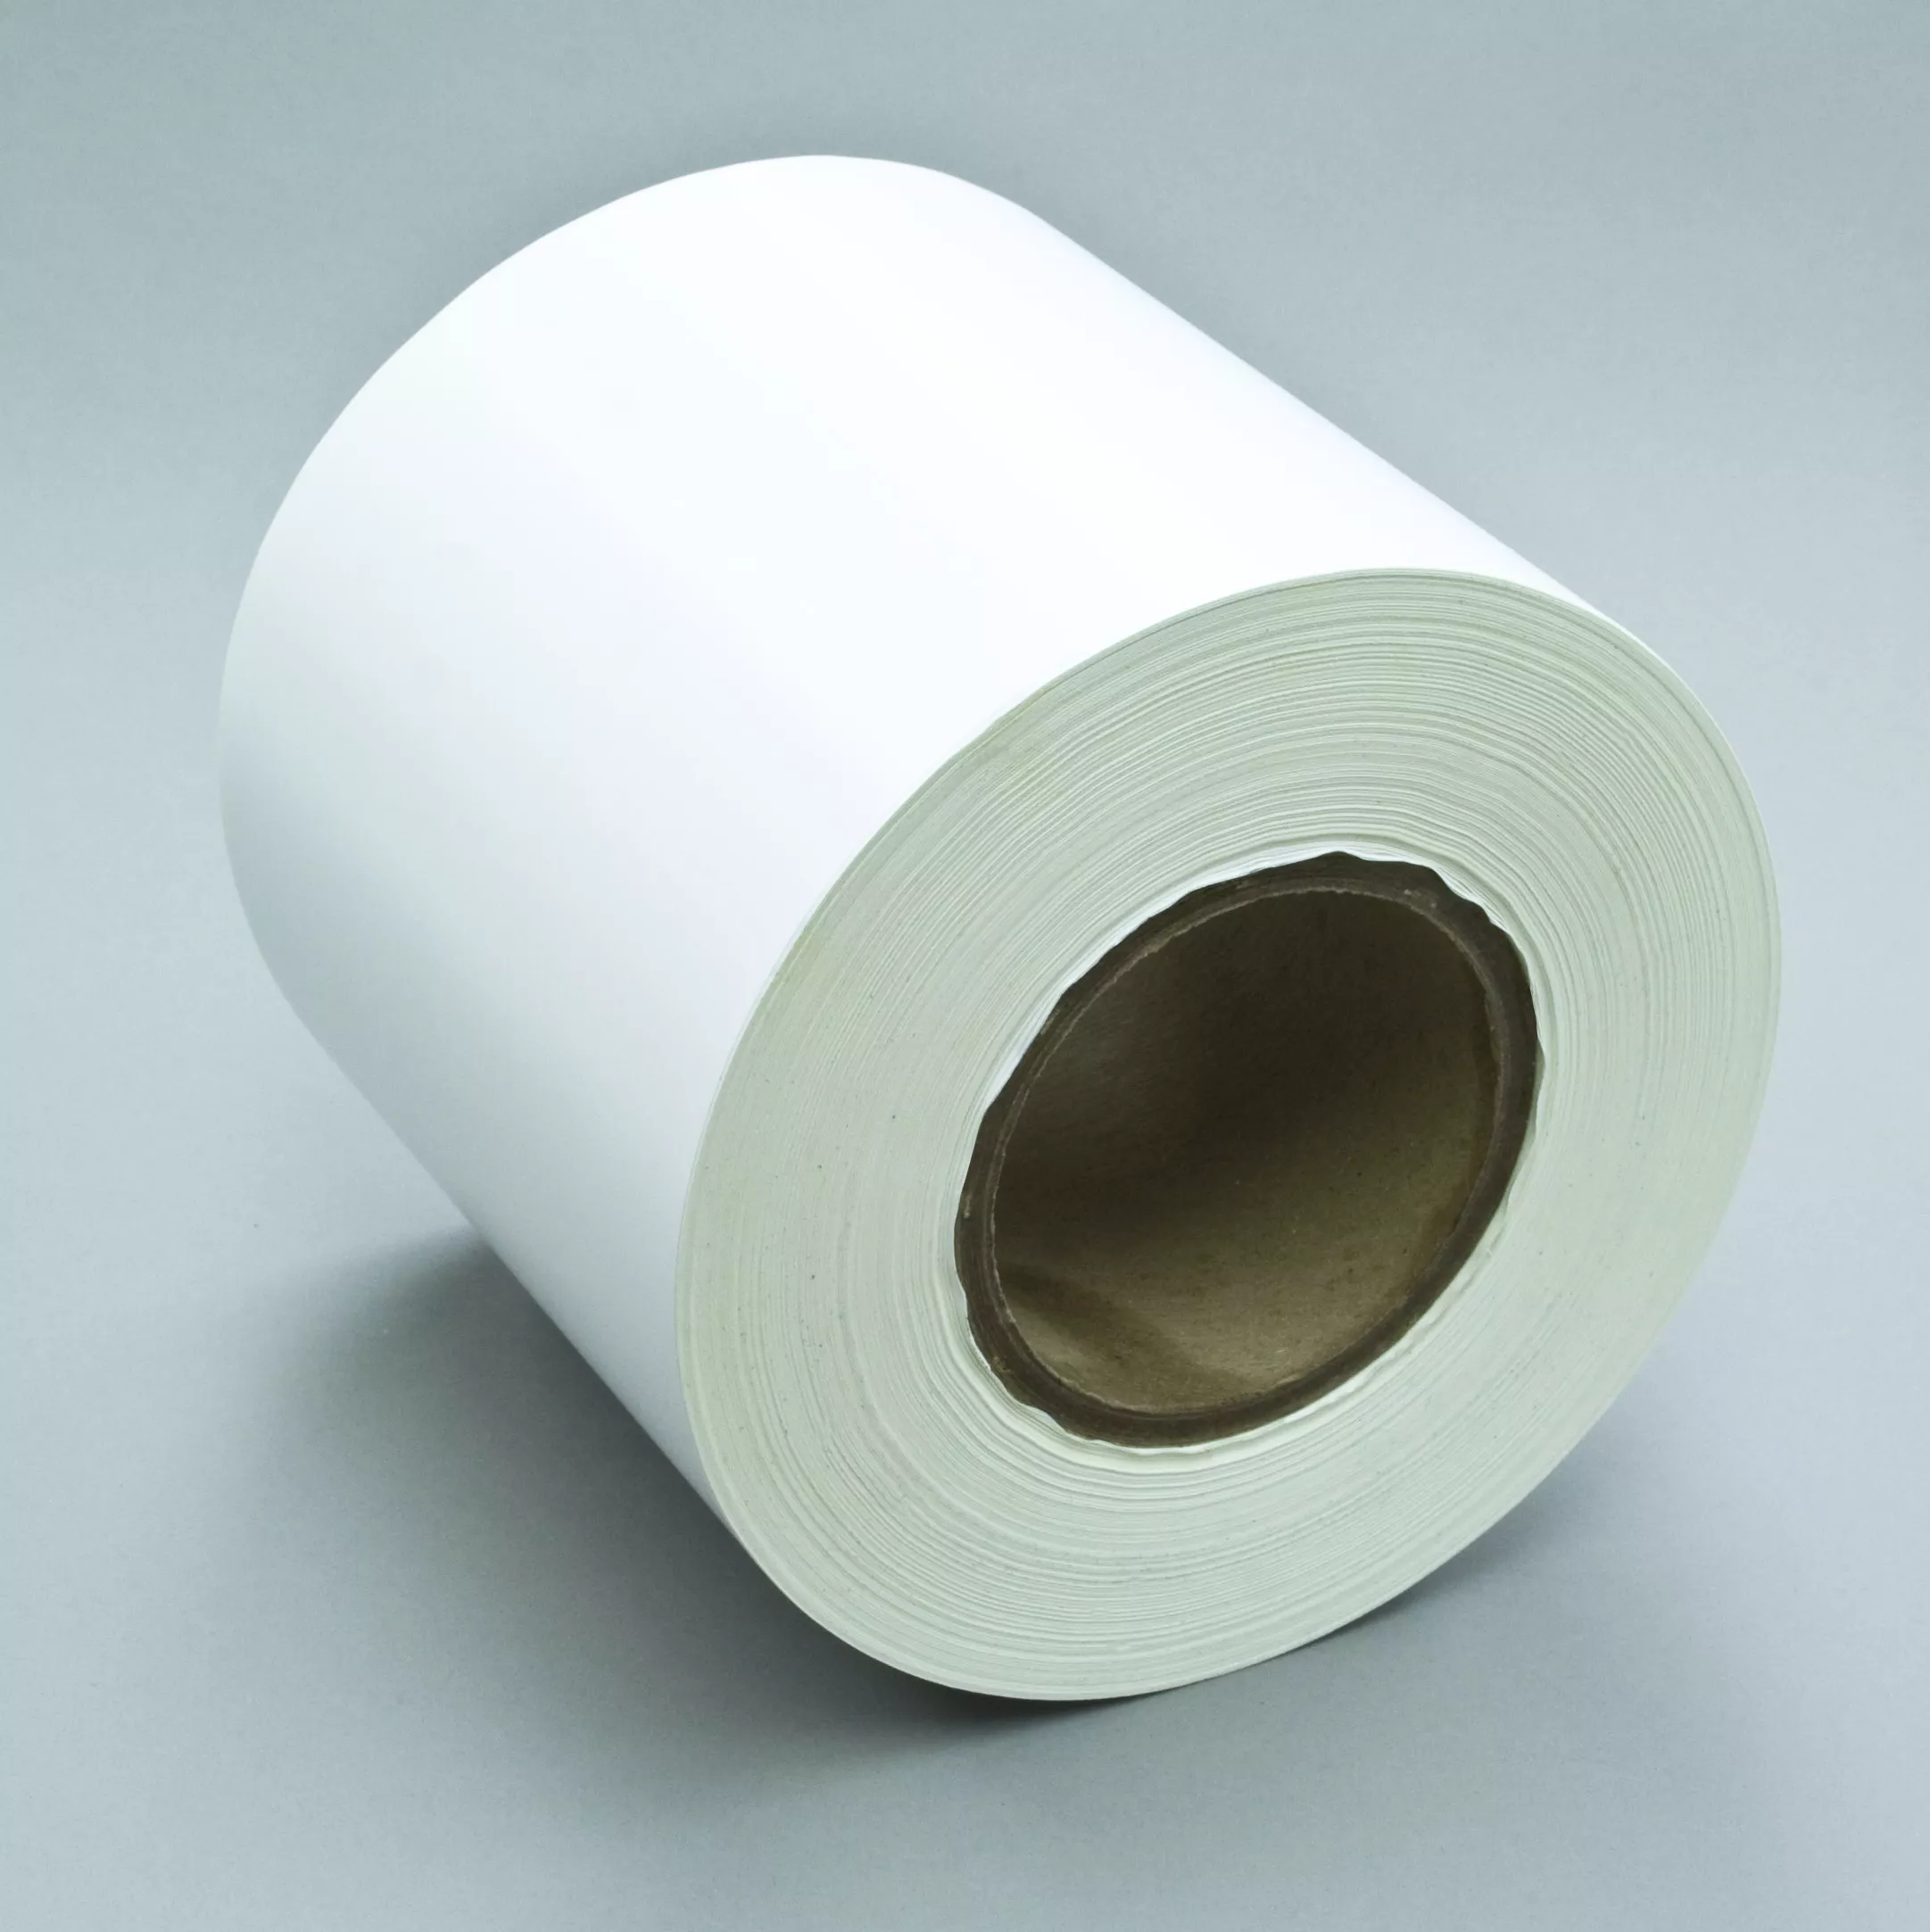 3M™ Thermal Transfer Label Material OFV0202, Soft White Vinyl, 6 in x
1668 ft, 1 Roll/Case